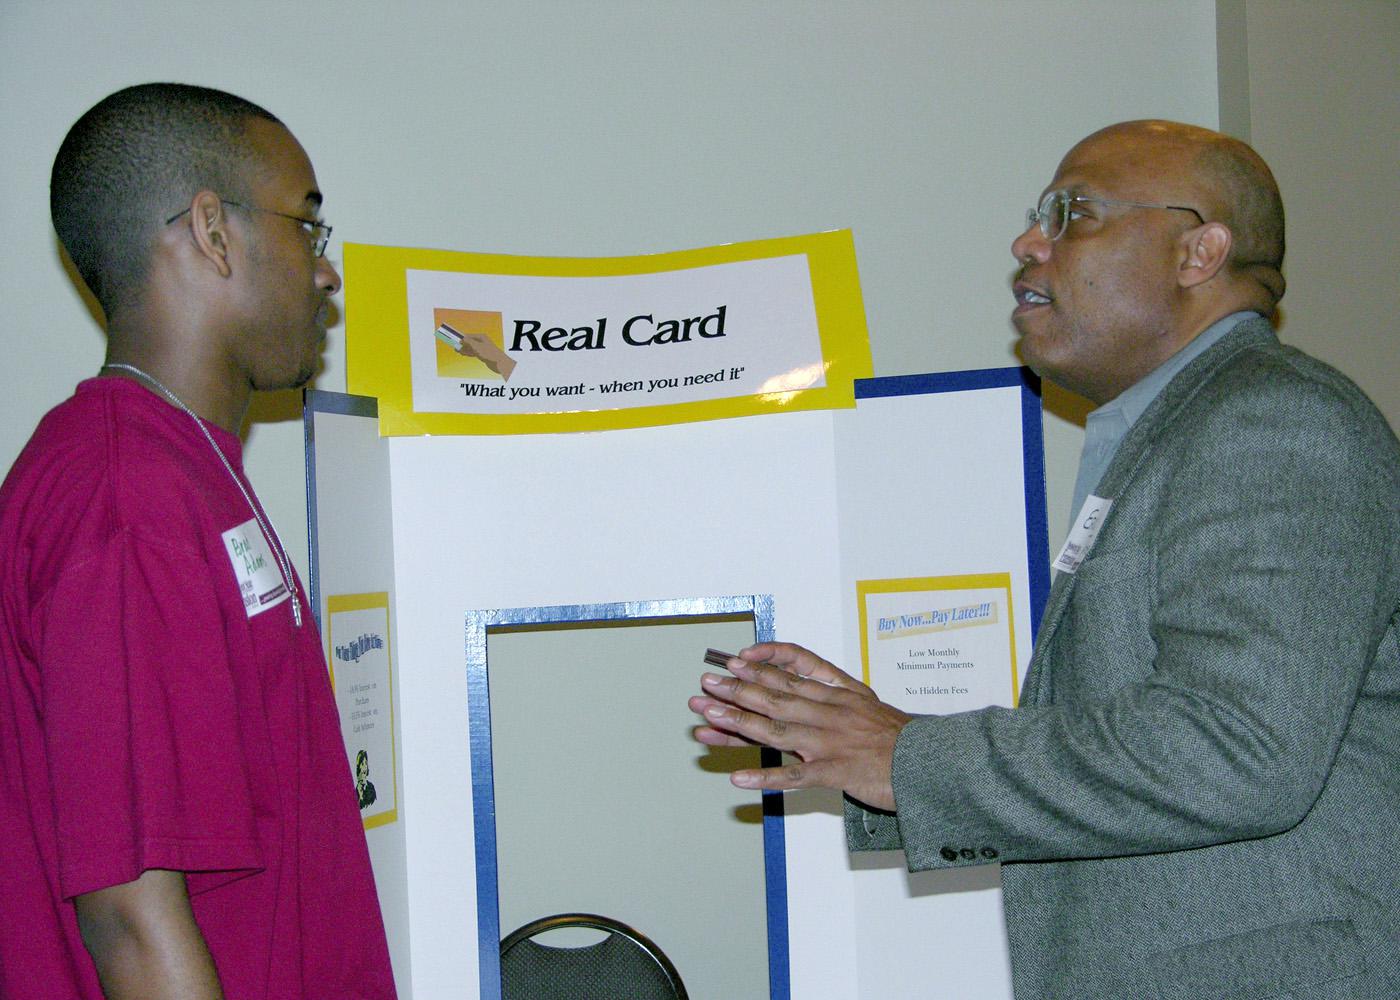 Brad Adams, a member of the Grenada High School's 4-H Leadership Club, listens to his options for a credit card from Eric Tate, playing the role of a credit card company representative in a Reality Check simulation. Tate, the director of human resources at Heatcraft in Grenada, was a resource volunteer assisting in a real-life simulation designed to enhance financial lessons.